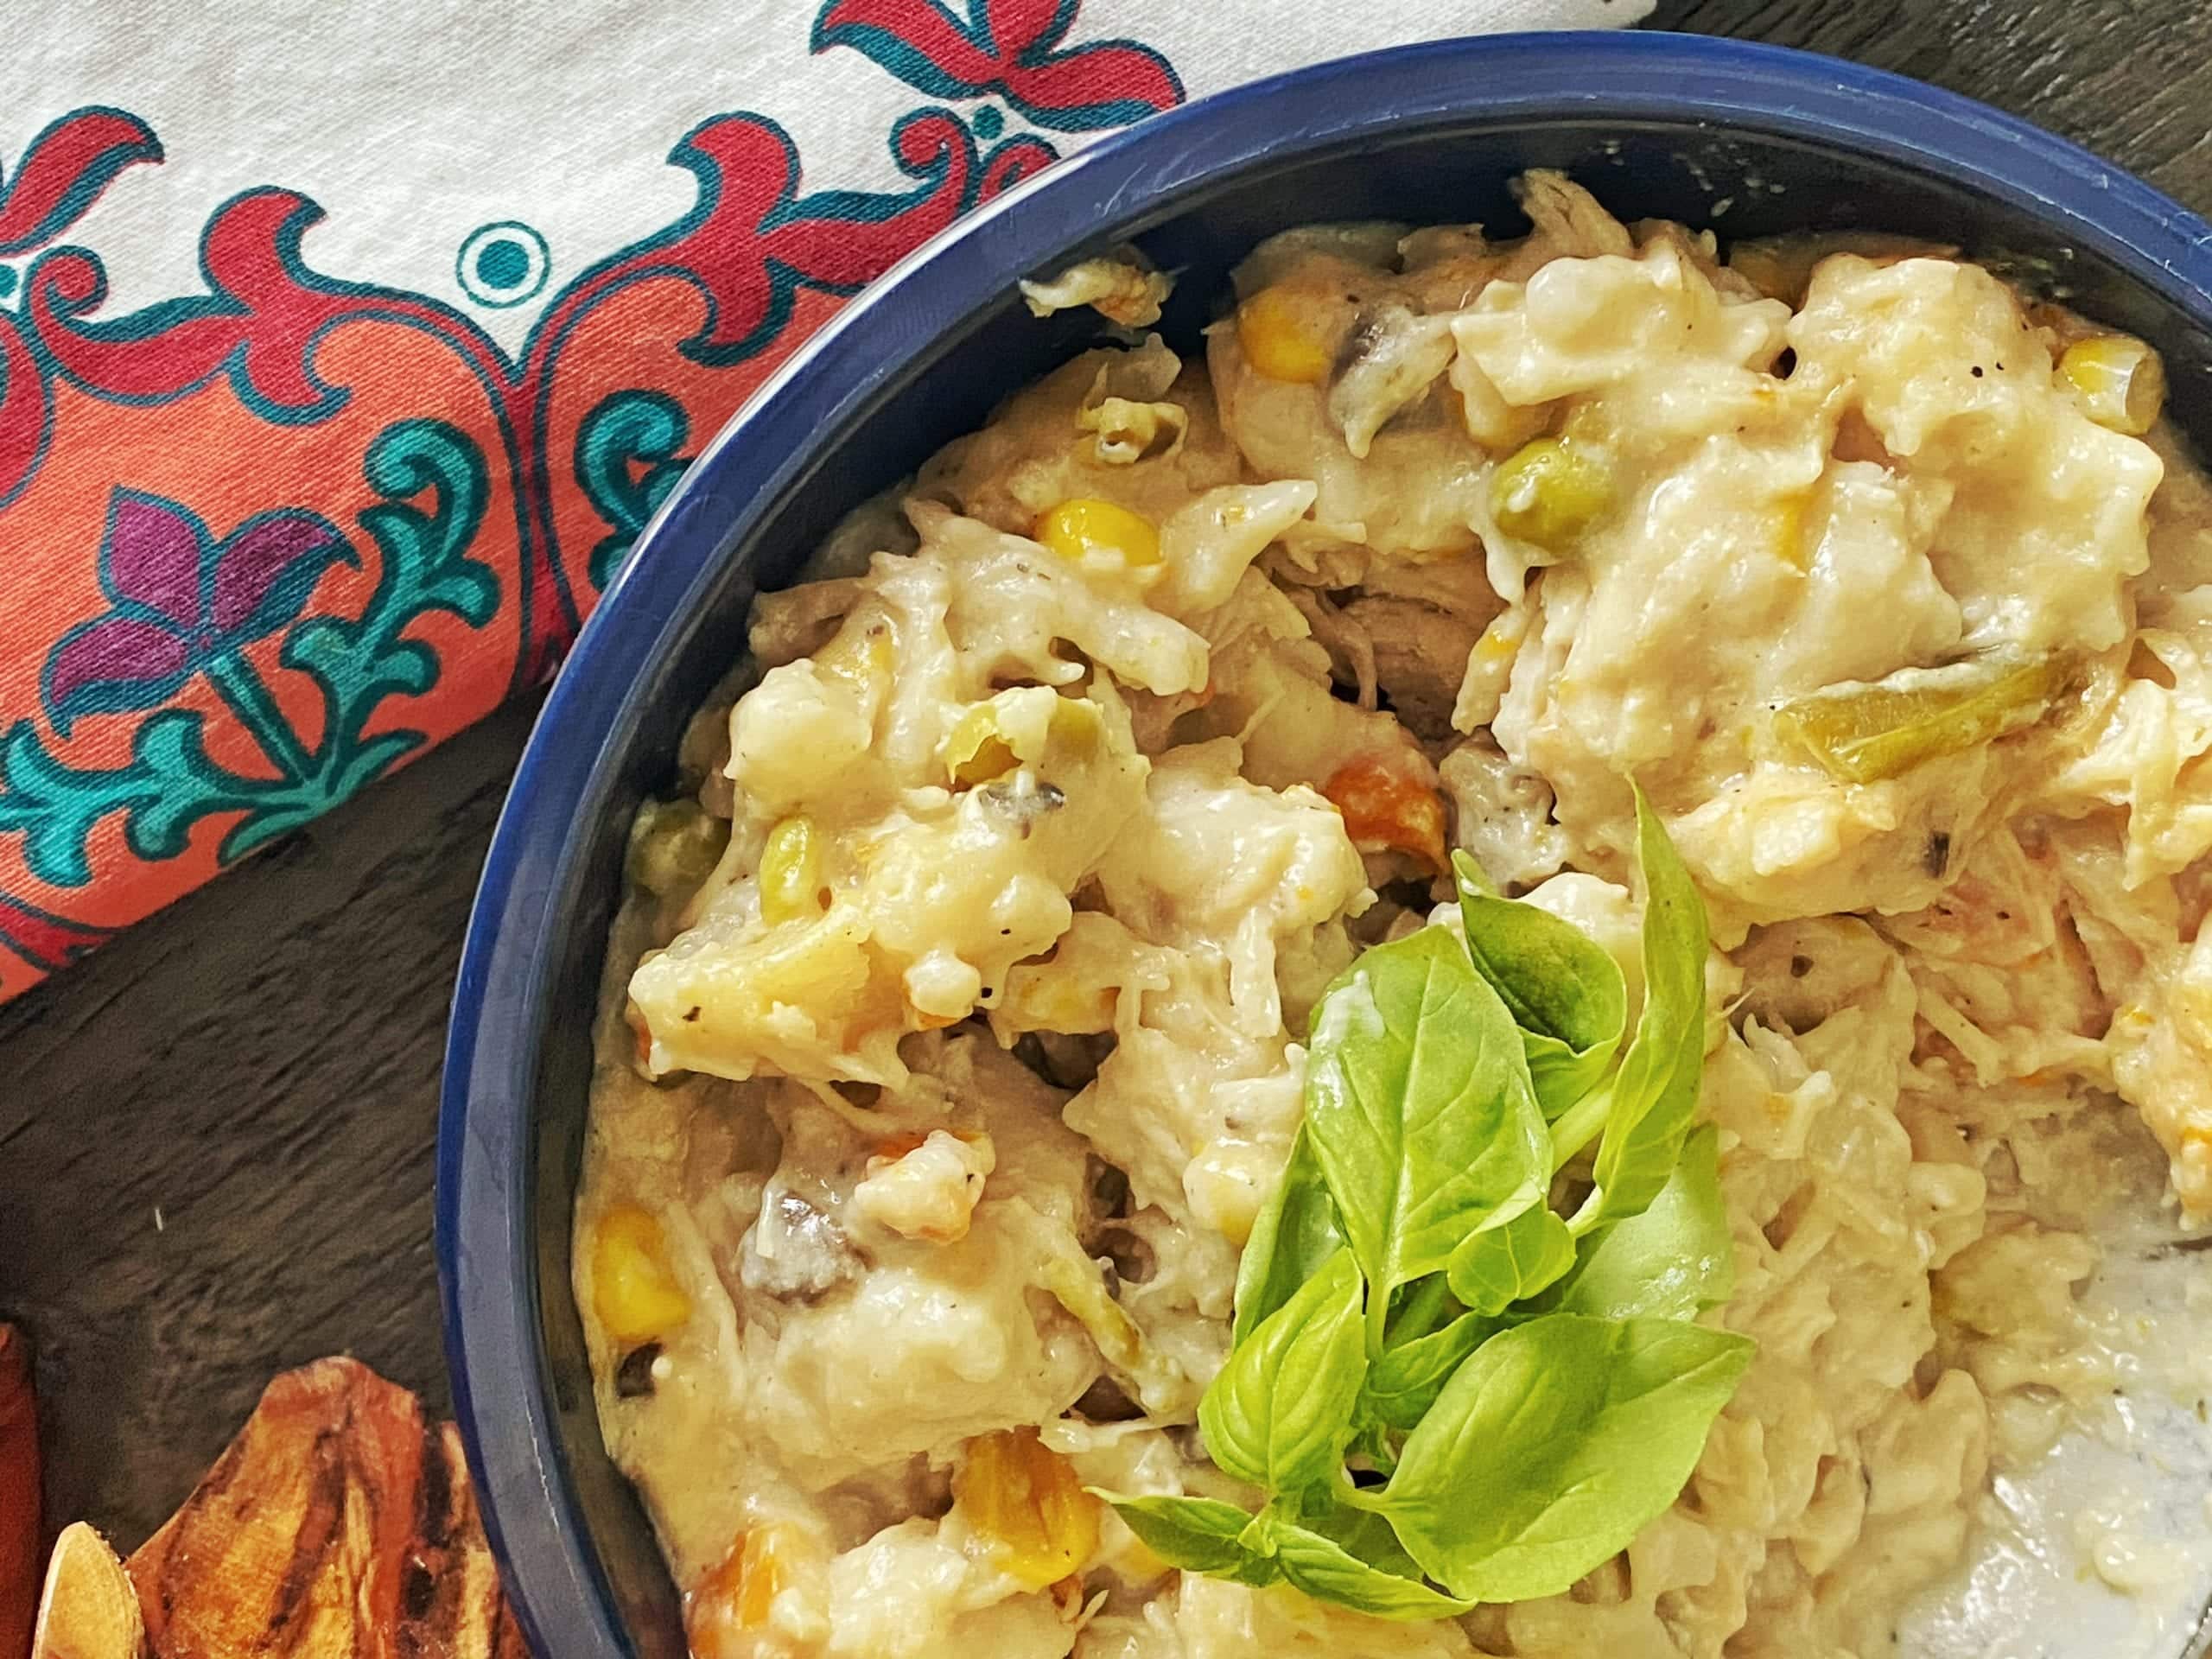 Cheap and Easy Crockpot Chicken and Dumplings Recipe thumbnail